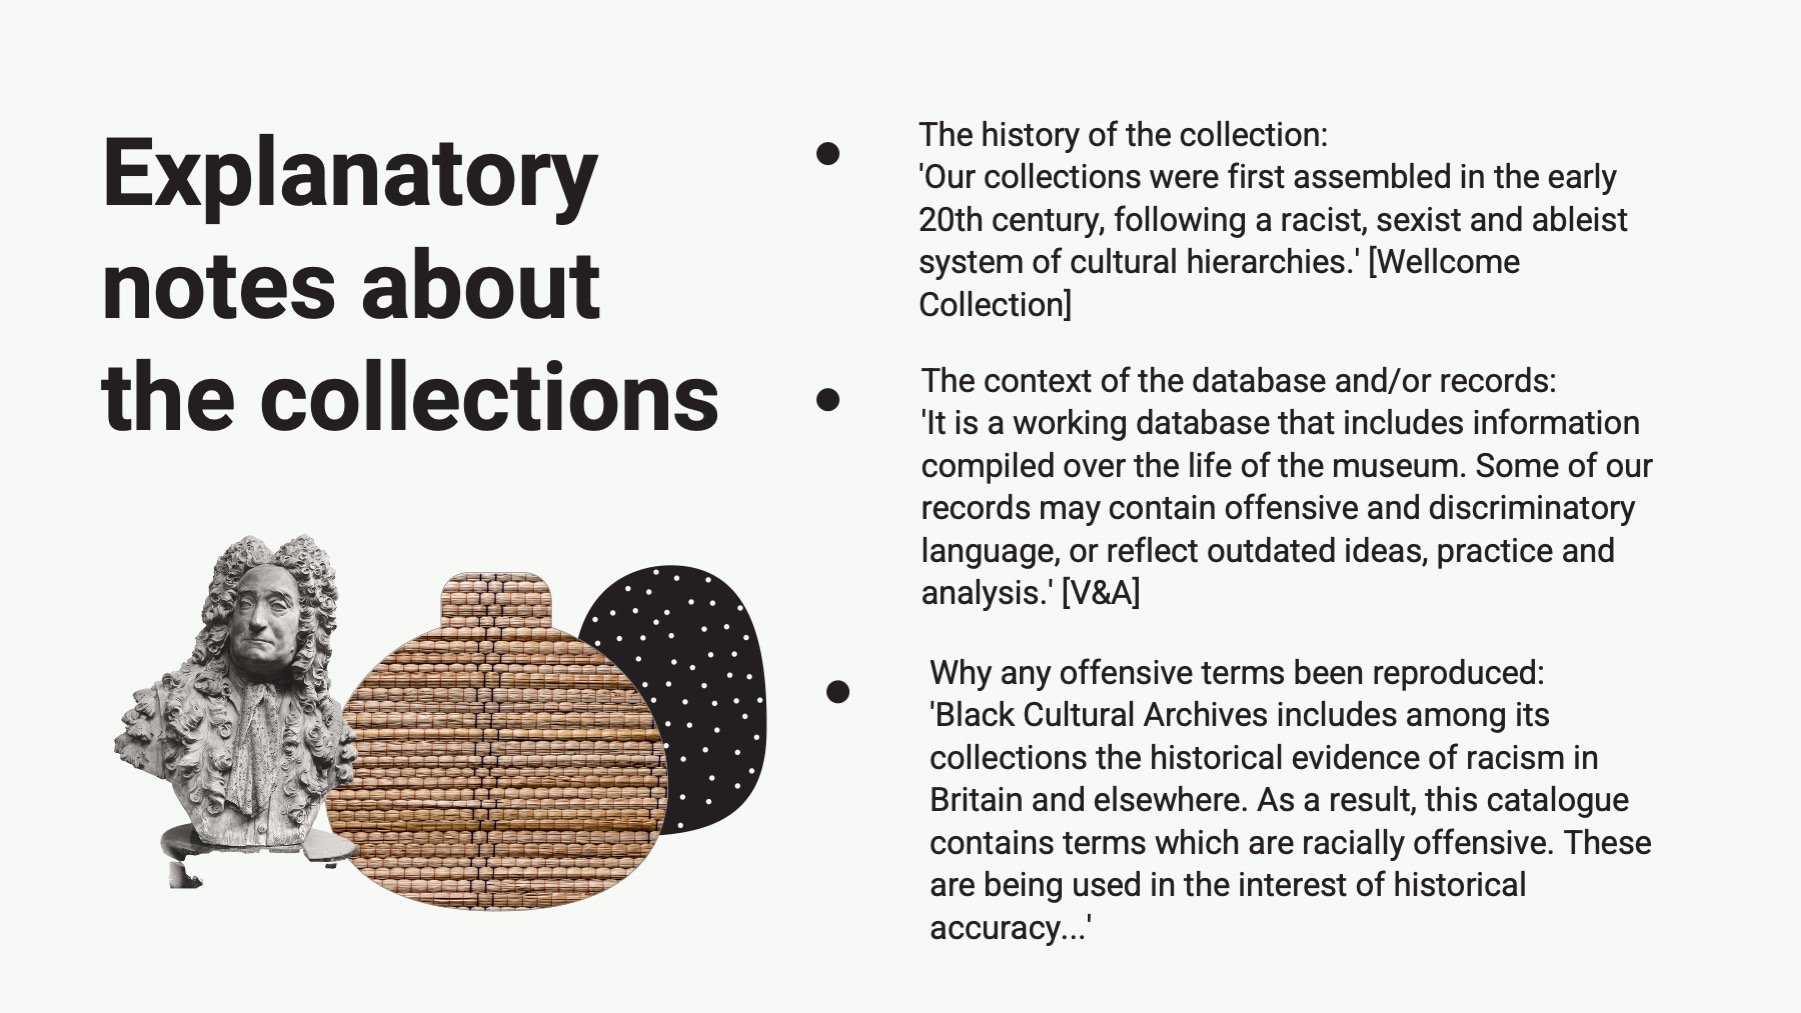 slide with the text: Explanatory notes about the collections The history of the collection: 'Our collections were first assembled in the early 20th century, following a racist, sexist and ableist system of cultural hierarchies. Wellcome Collection The context of the database and/or records: 'It is a working database that includes information compiled over the life of the museum. Some of our records may contain offensive and discriminatory language, or reflect outdated ideas, practice and analysis.' V&A Why any offensive terms been reproduced: 'Black Cultural Archives includes among its collections the historical evidence of racism in Britain and elsewhere. As a result, this cataloque contains terms which are racially offensive. These are being used in the interest of historical accuracy……